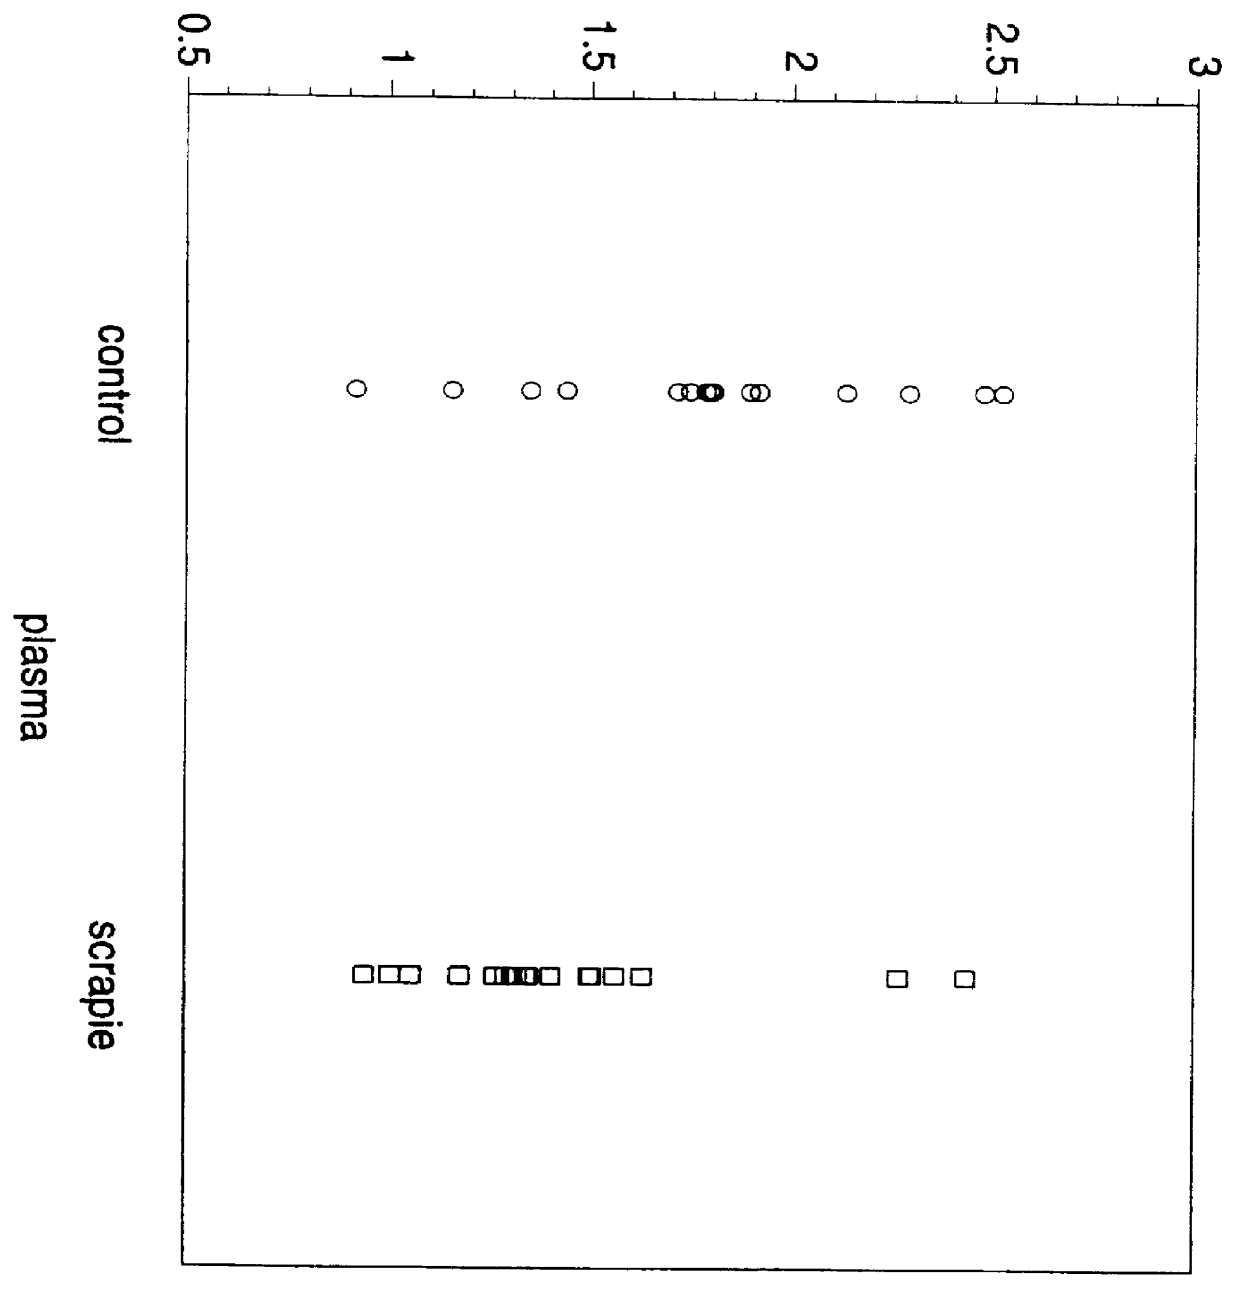 Method of concentrating prion proteins in blood samples